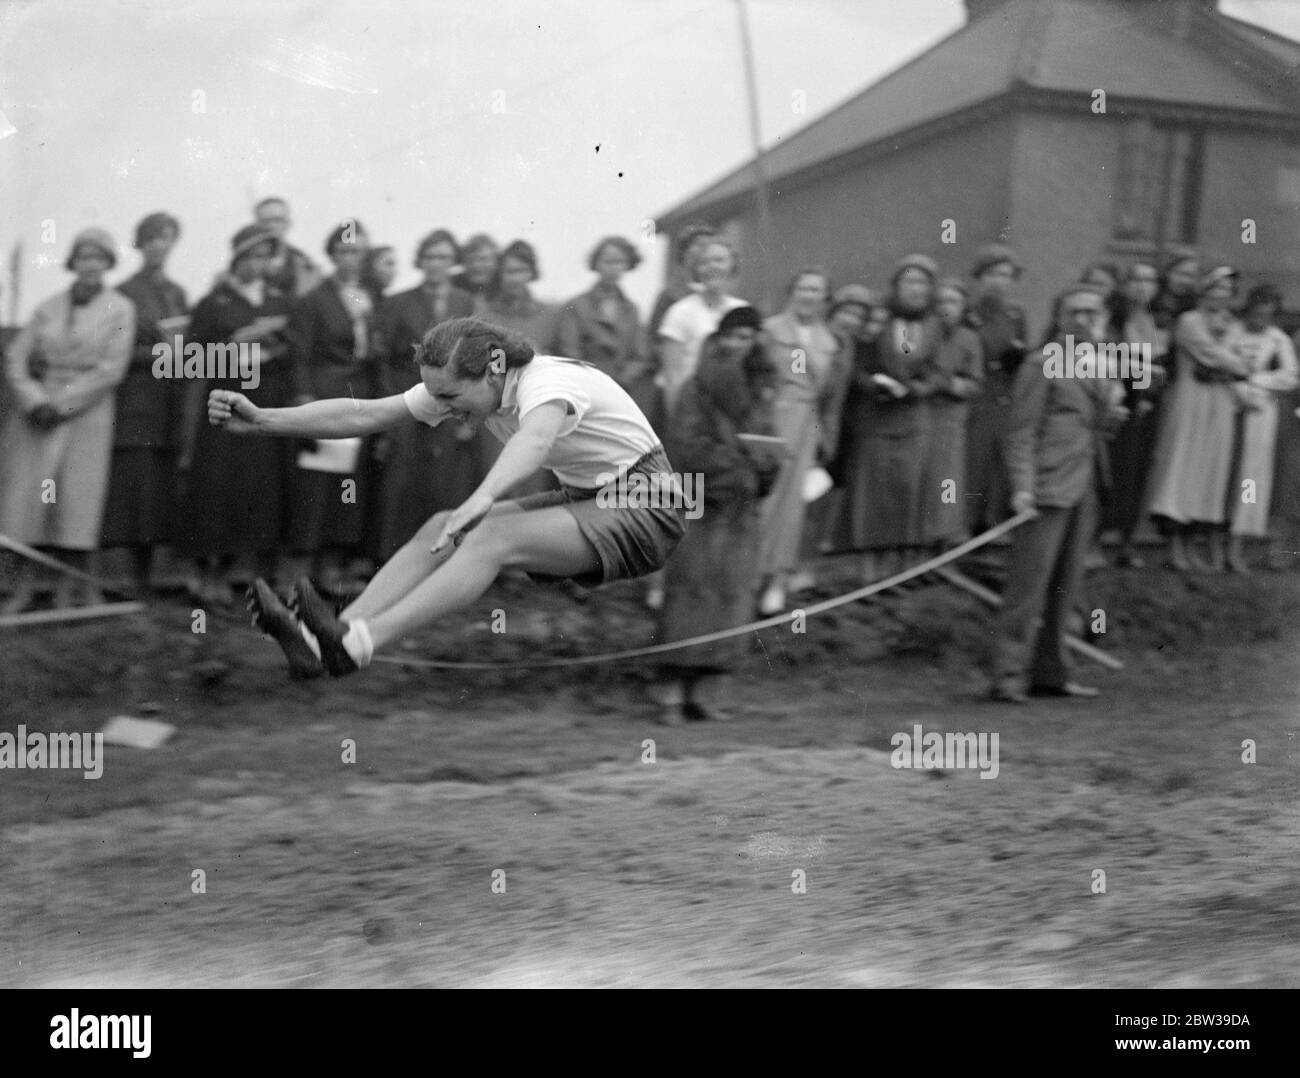 Girl athlete breaks school record for long jump at Kings College sports . Miss Barbara Eve broke the school record for the long jump , when she jumped 16 feet four inches and won the event at the King ' s College , sixty - second annual Athletic meeting , held at the College War Memorial Grounds , Lavenden Avenue , Mitcham . Photo shows ; Miss Barbara Eve breaking the record for the school with a long jump of 16 feet 4 inches . 28 April 1934 Stock Photo